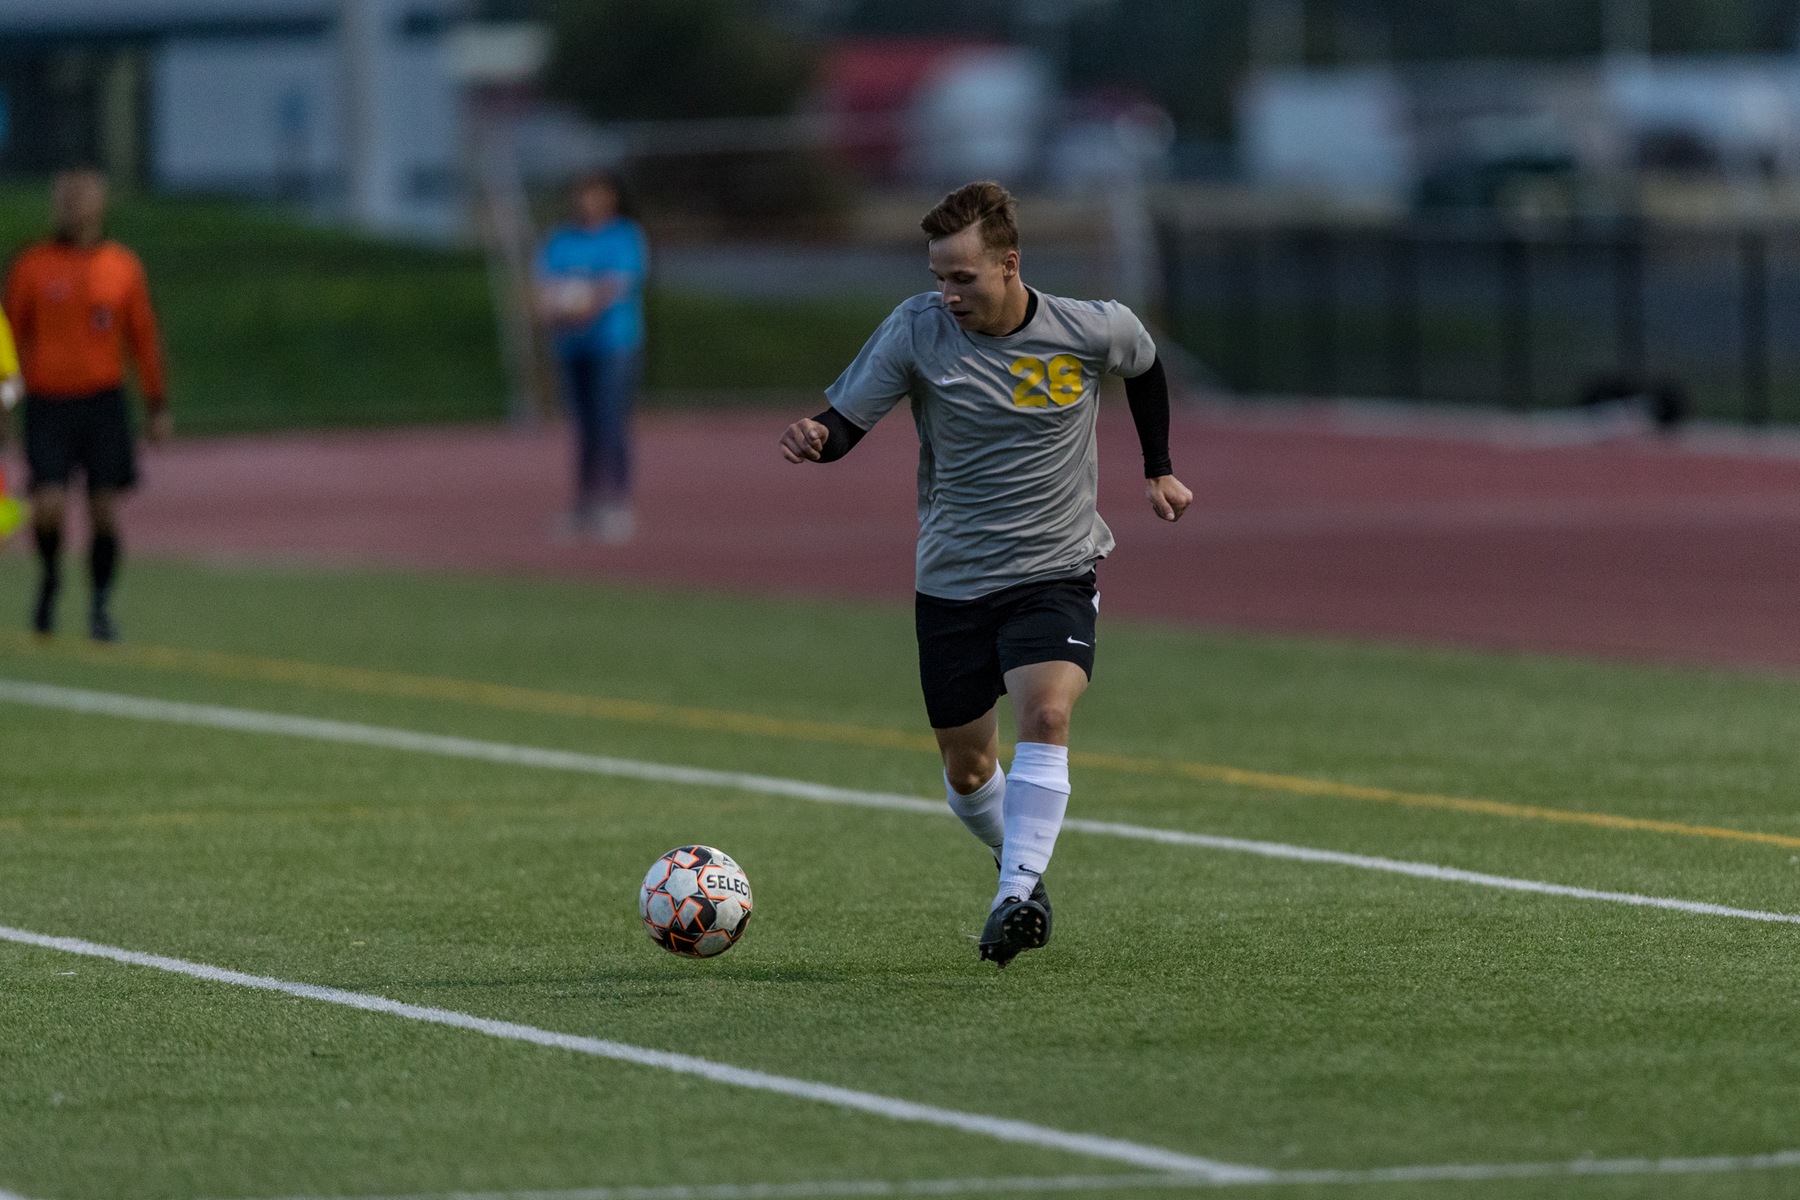 Broncbusters give up second-half goal in loss to Pratt